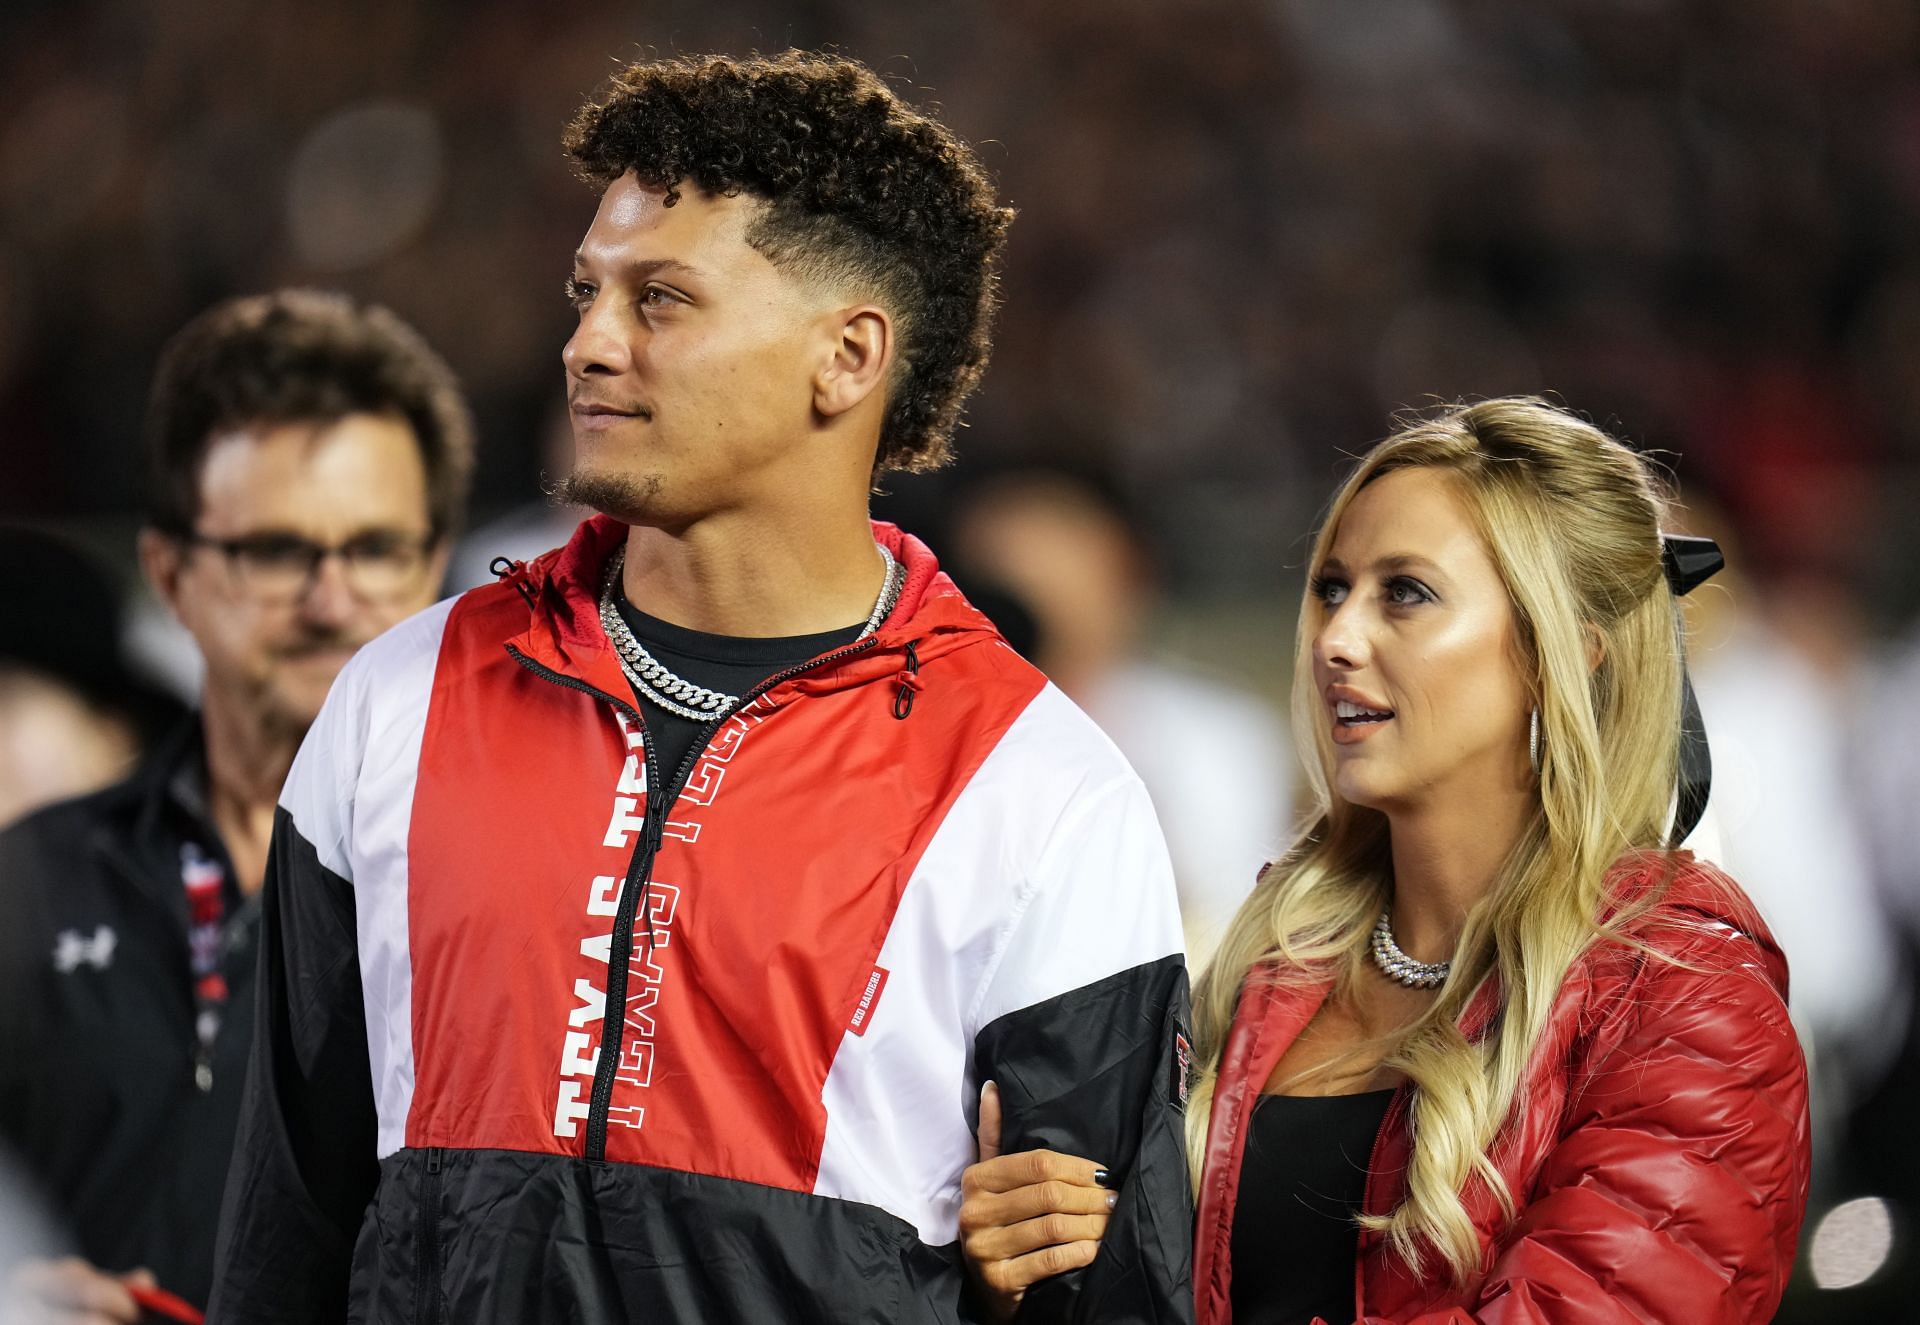 Briggs: What if Patrick Mahomes had become a Mud Hen?